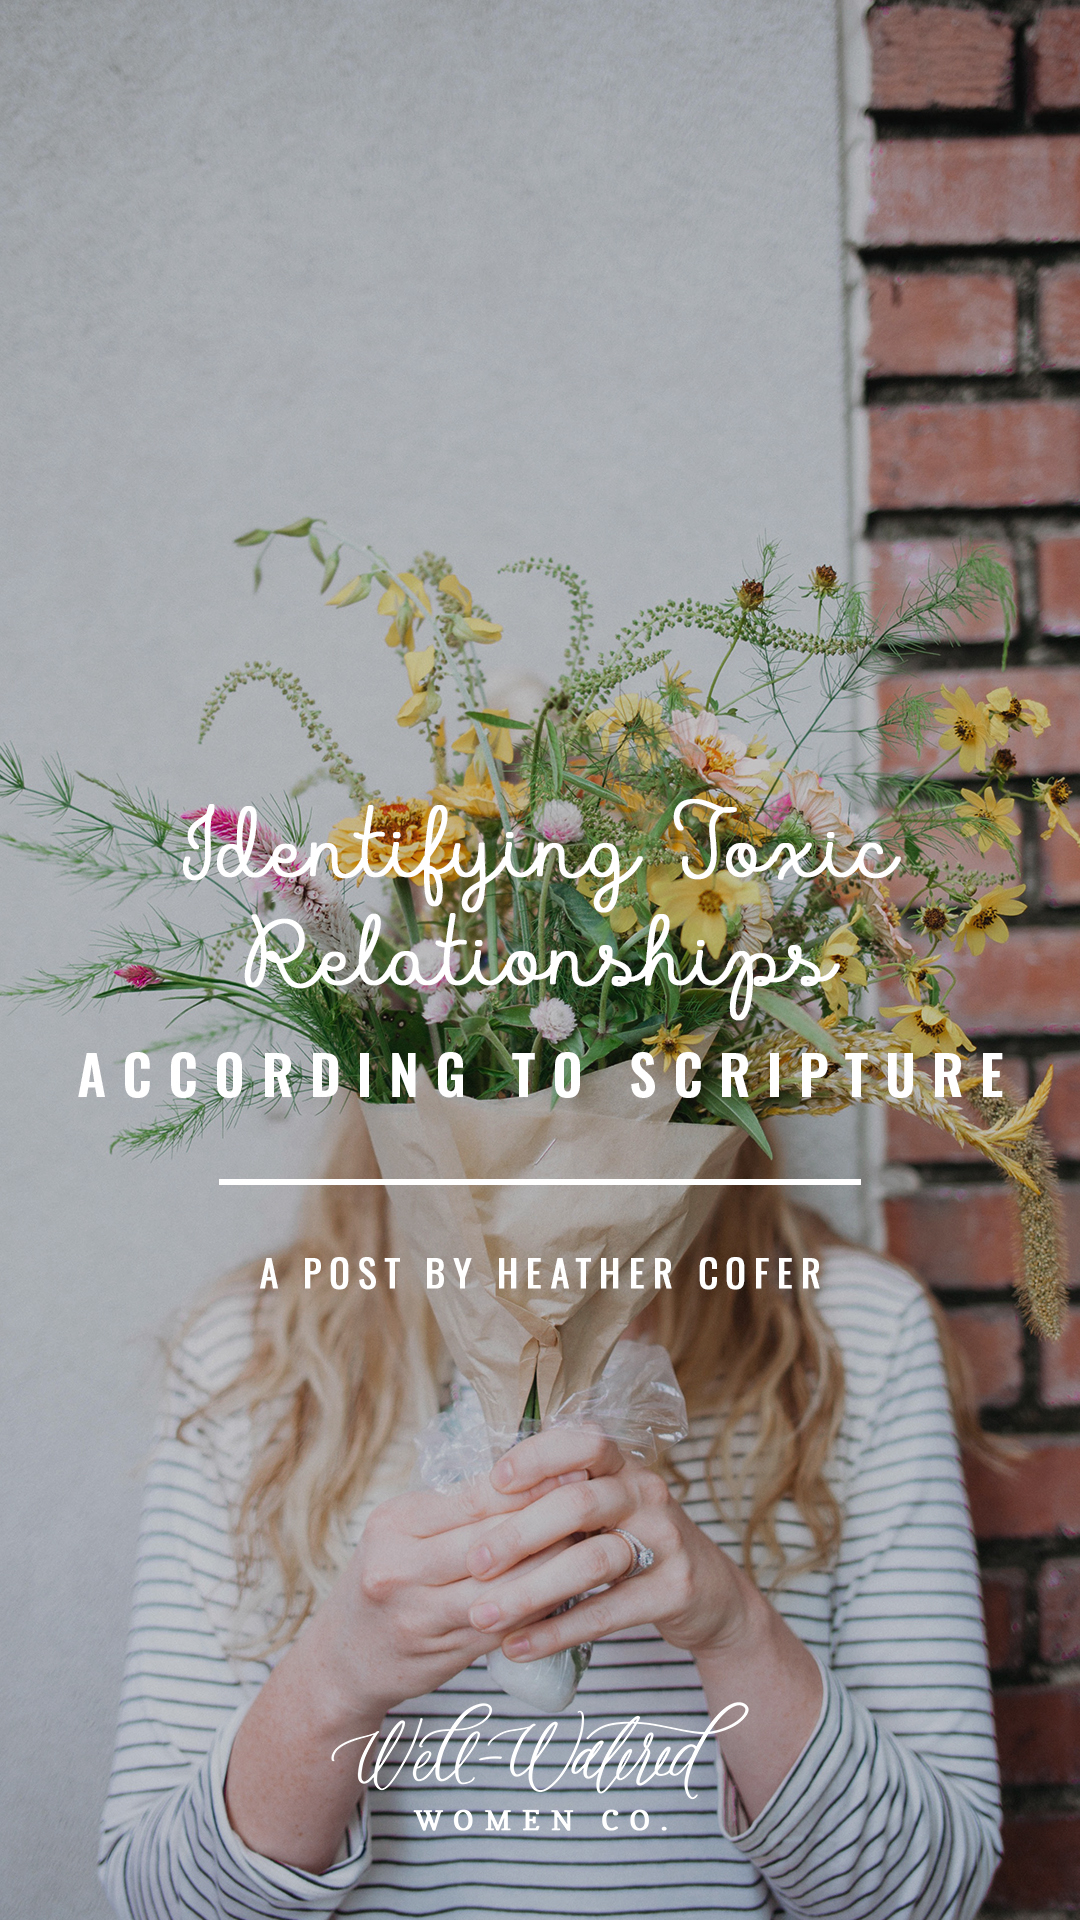 Well-Watered Women Blog - Beware Toxic Relationships and How to Identify Them According to Scripture